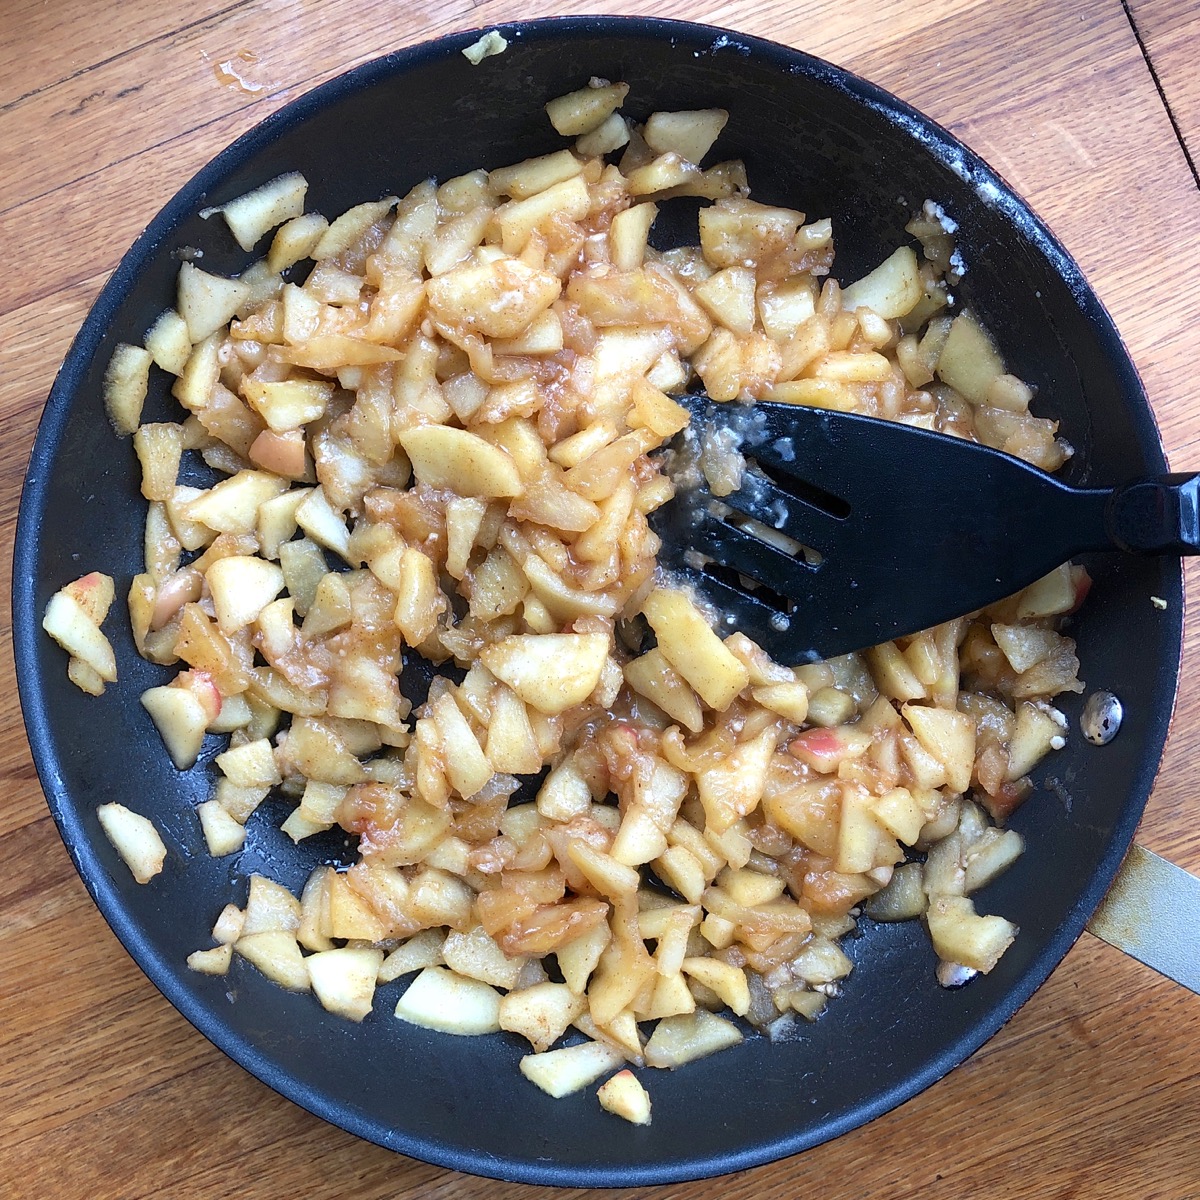 Diced apples gently fried in a large frying pan with butter and boiled cider.